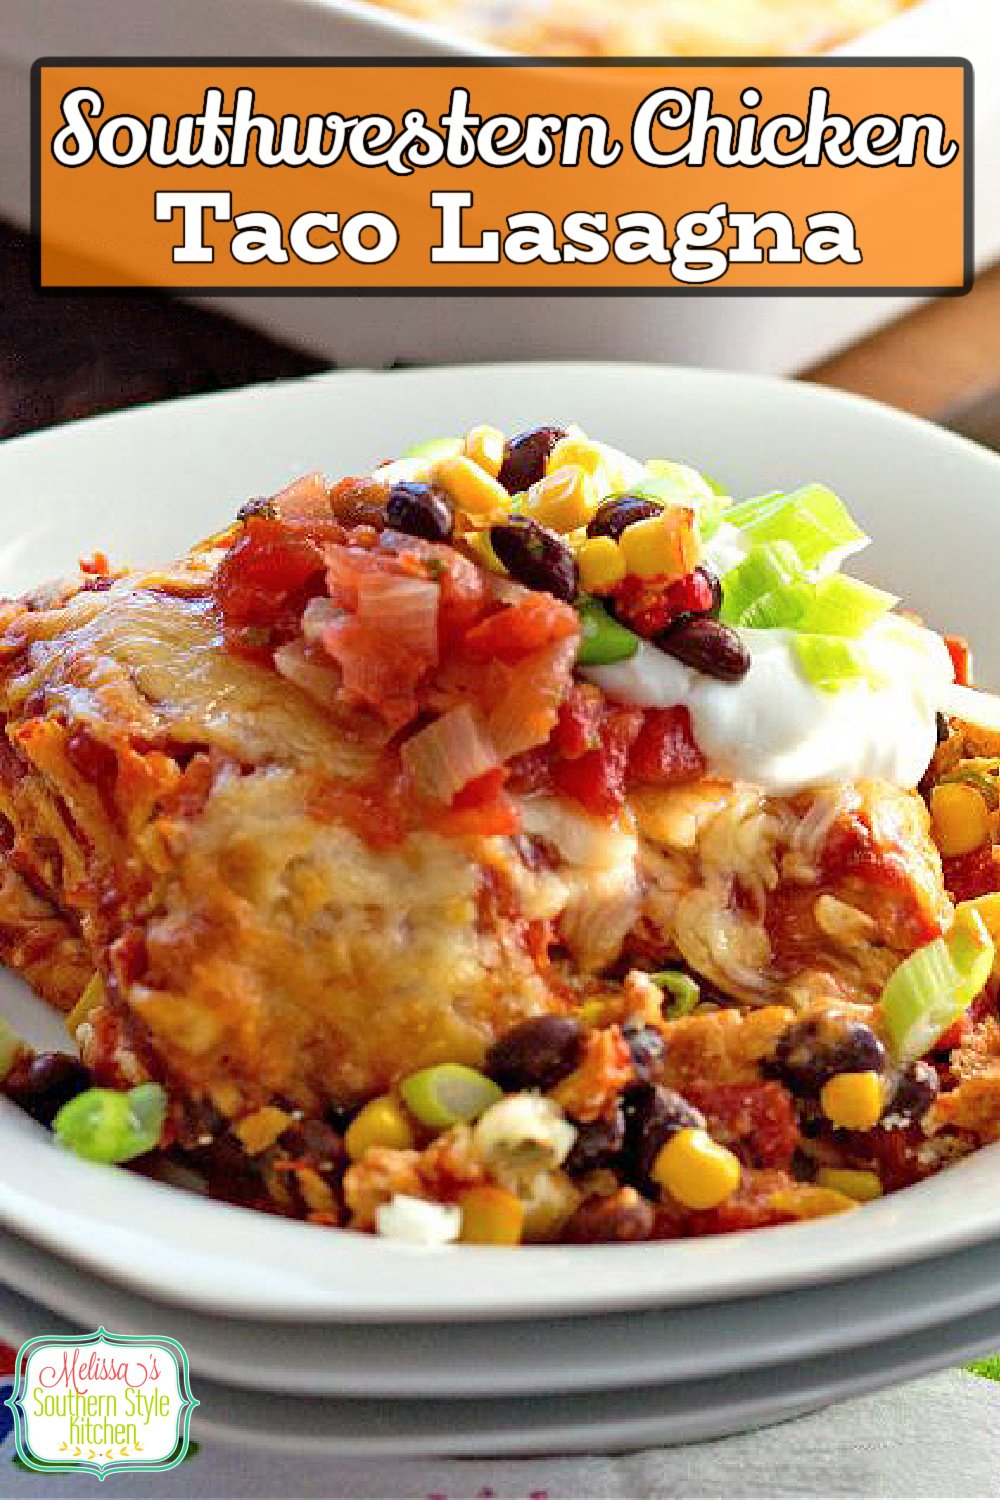 The family will love this packed with flavor Southwestern Chicken Taco Lasagna #chickentacos #lasagna #chickenlasagna #tacos #southwesternchickentacos #easychickenrecipes #pasta via @melissasssk